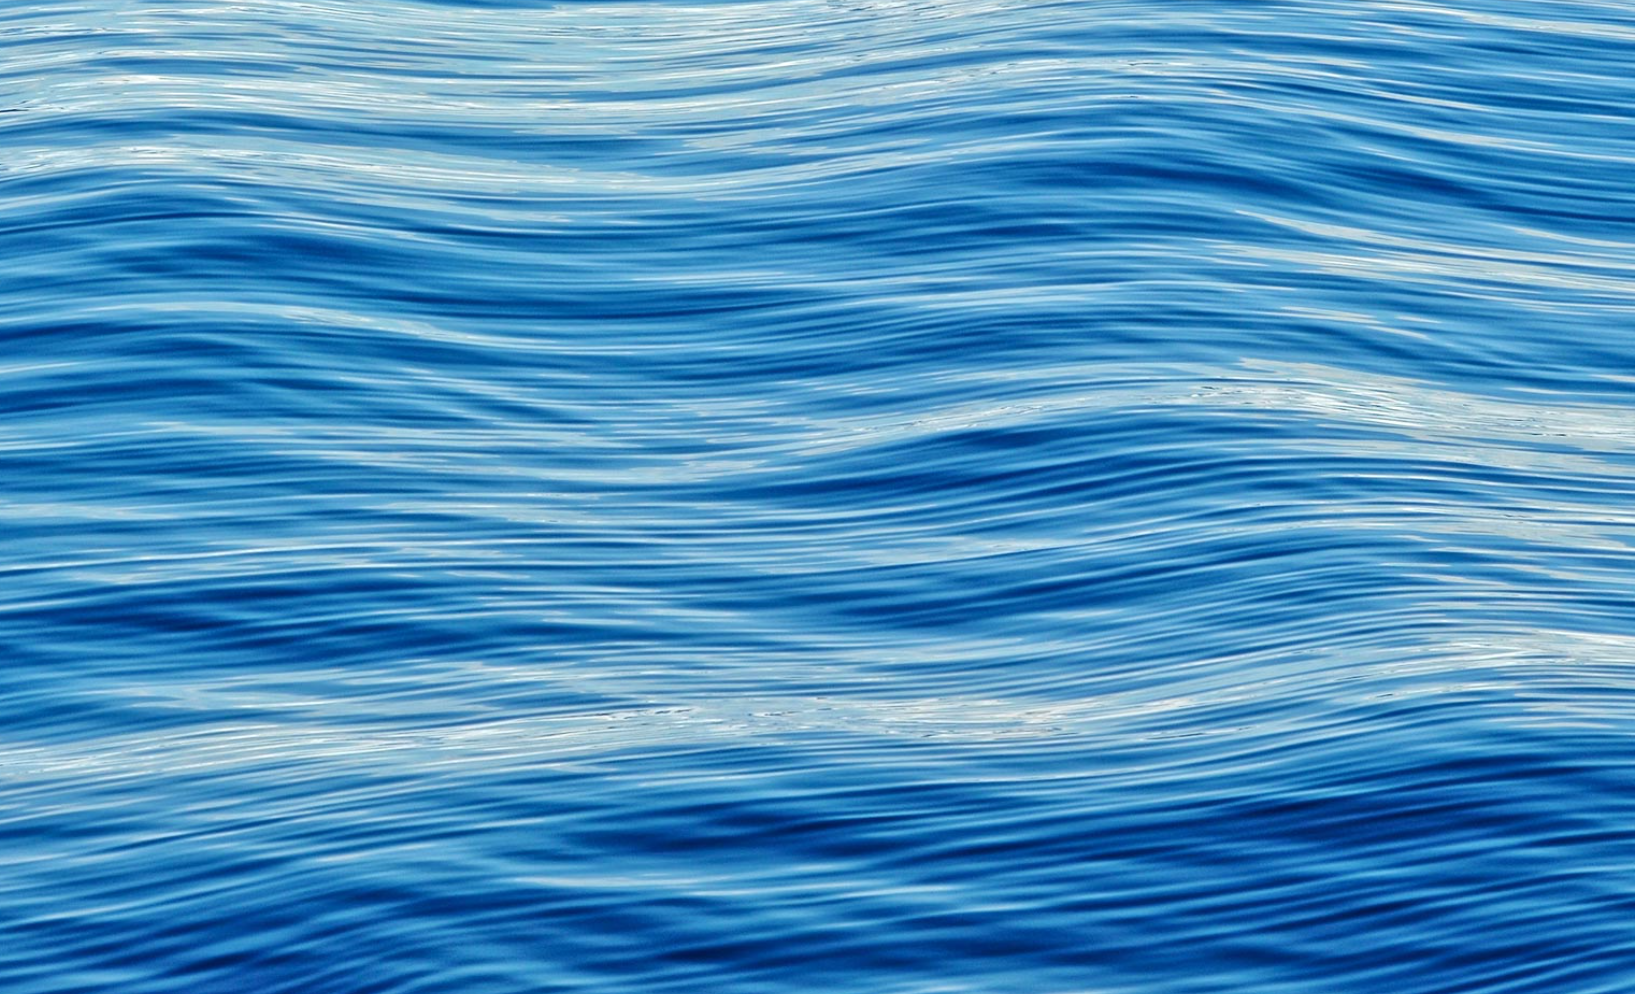 The Complete Guide to Blue Ocean Strategy